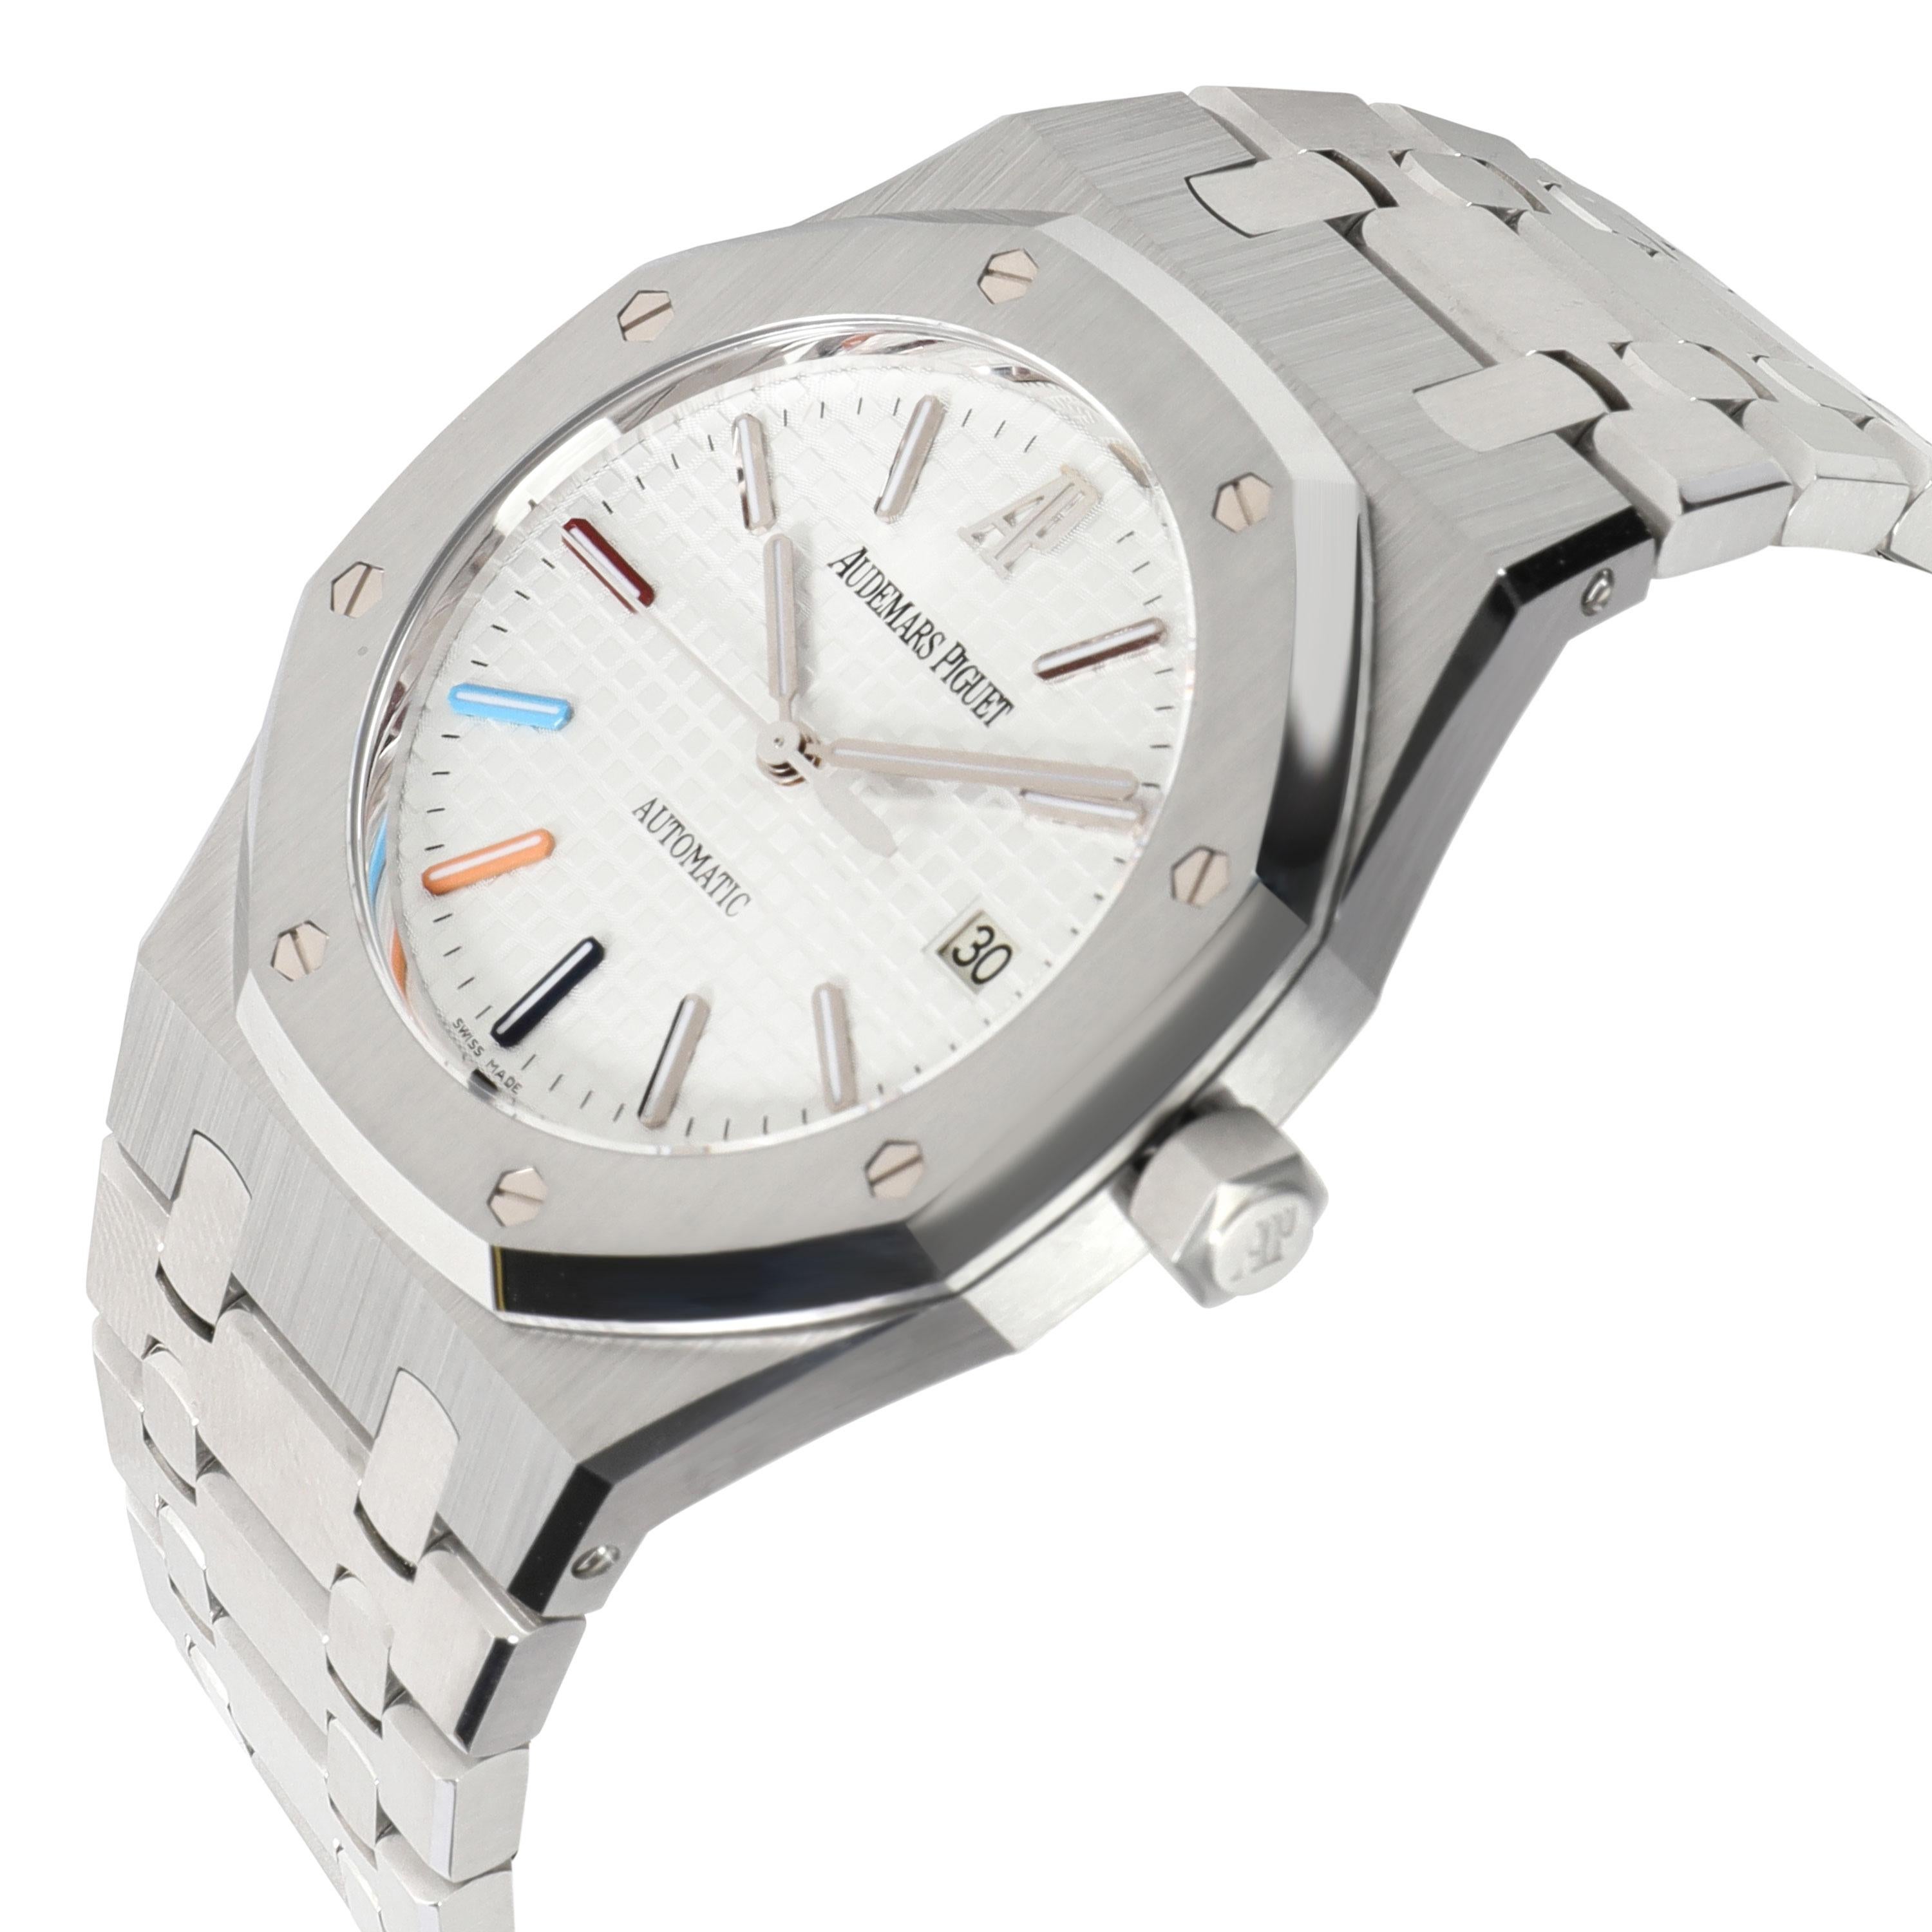 
Audemars Piguet Royal Oak 15313ST.OO.1220ST.01 Men's Watch in Stainless Steel

SKU: 106353

PRIMARY DETAILS
Brand:  Audemars Piguet
Model: Royal Oak
Country of Origin: Switzerland
Movement Type: Mechanical: Automatic/Kinetic
Year Manufactured: